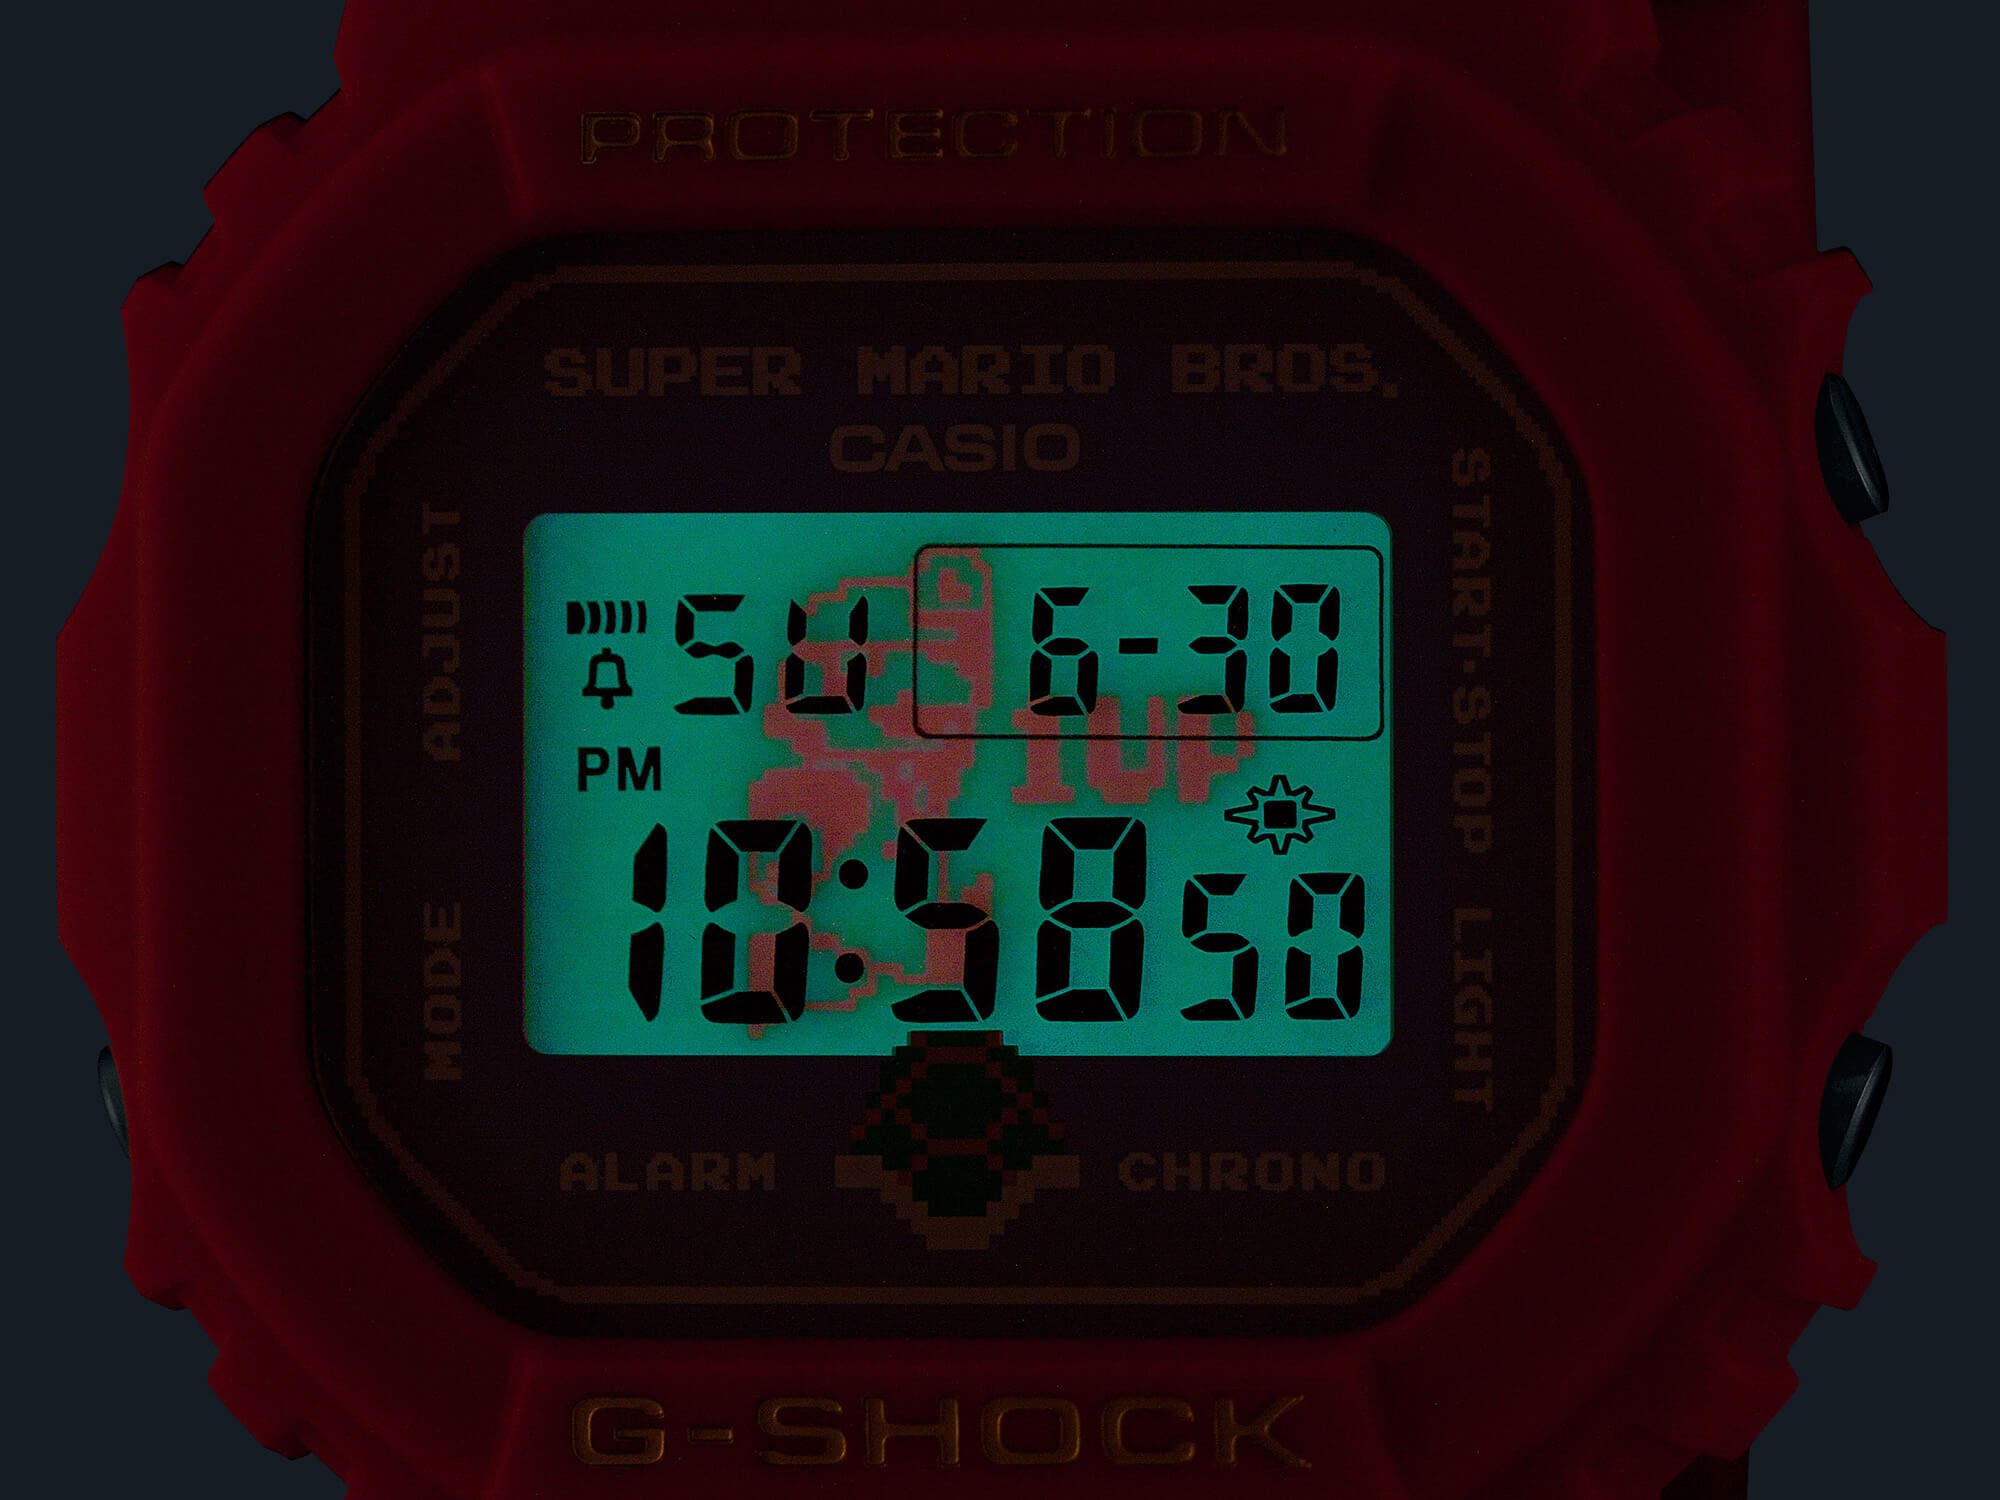 DW5600SMB watch backlight with Super Mario Brothers logo